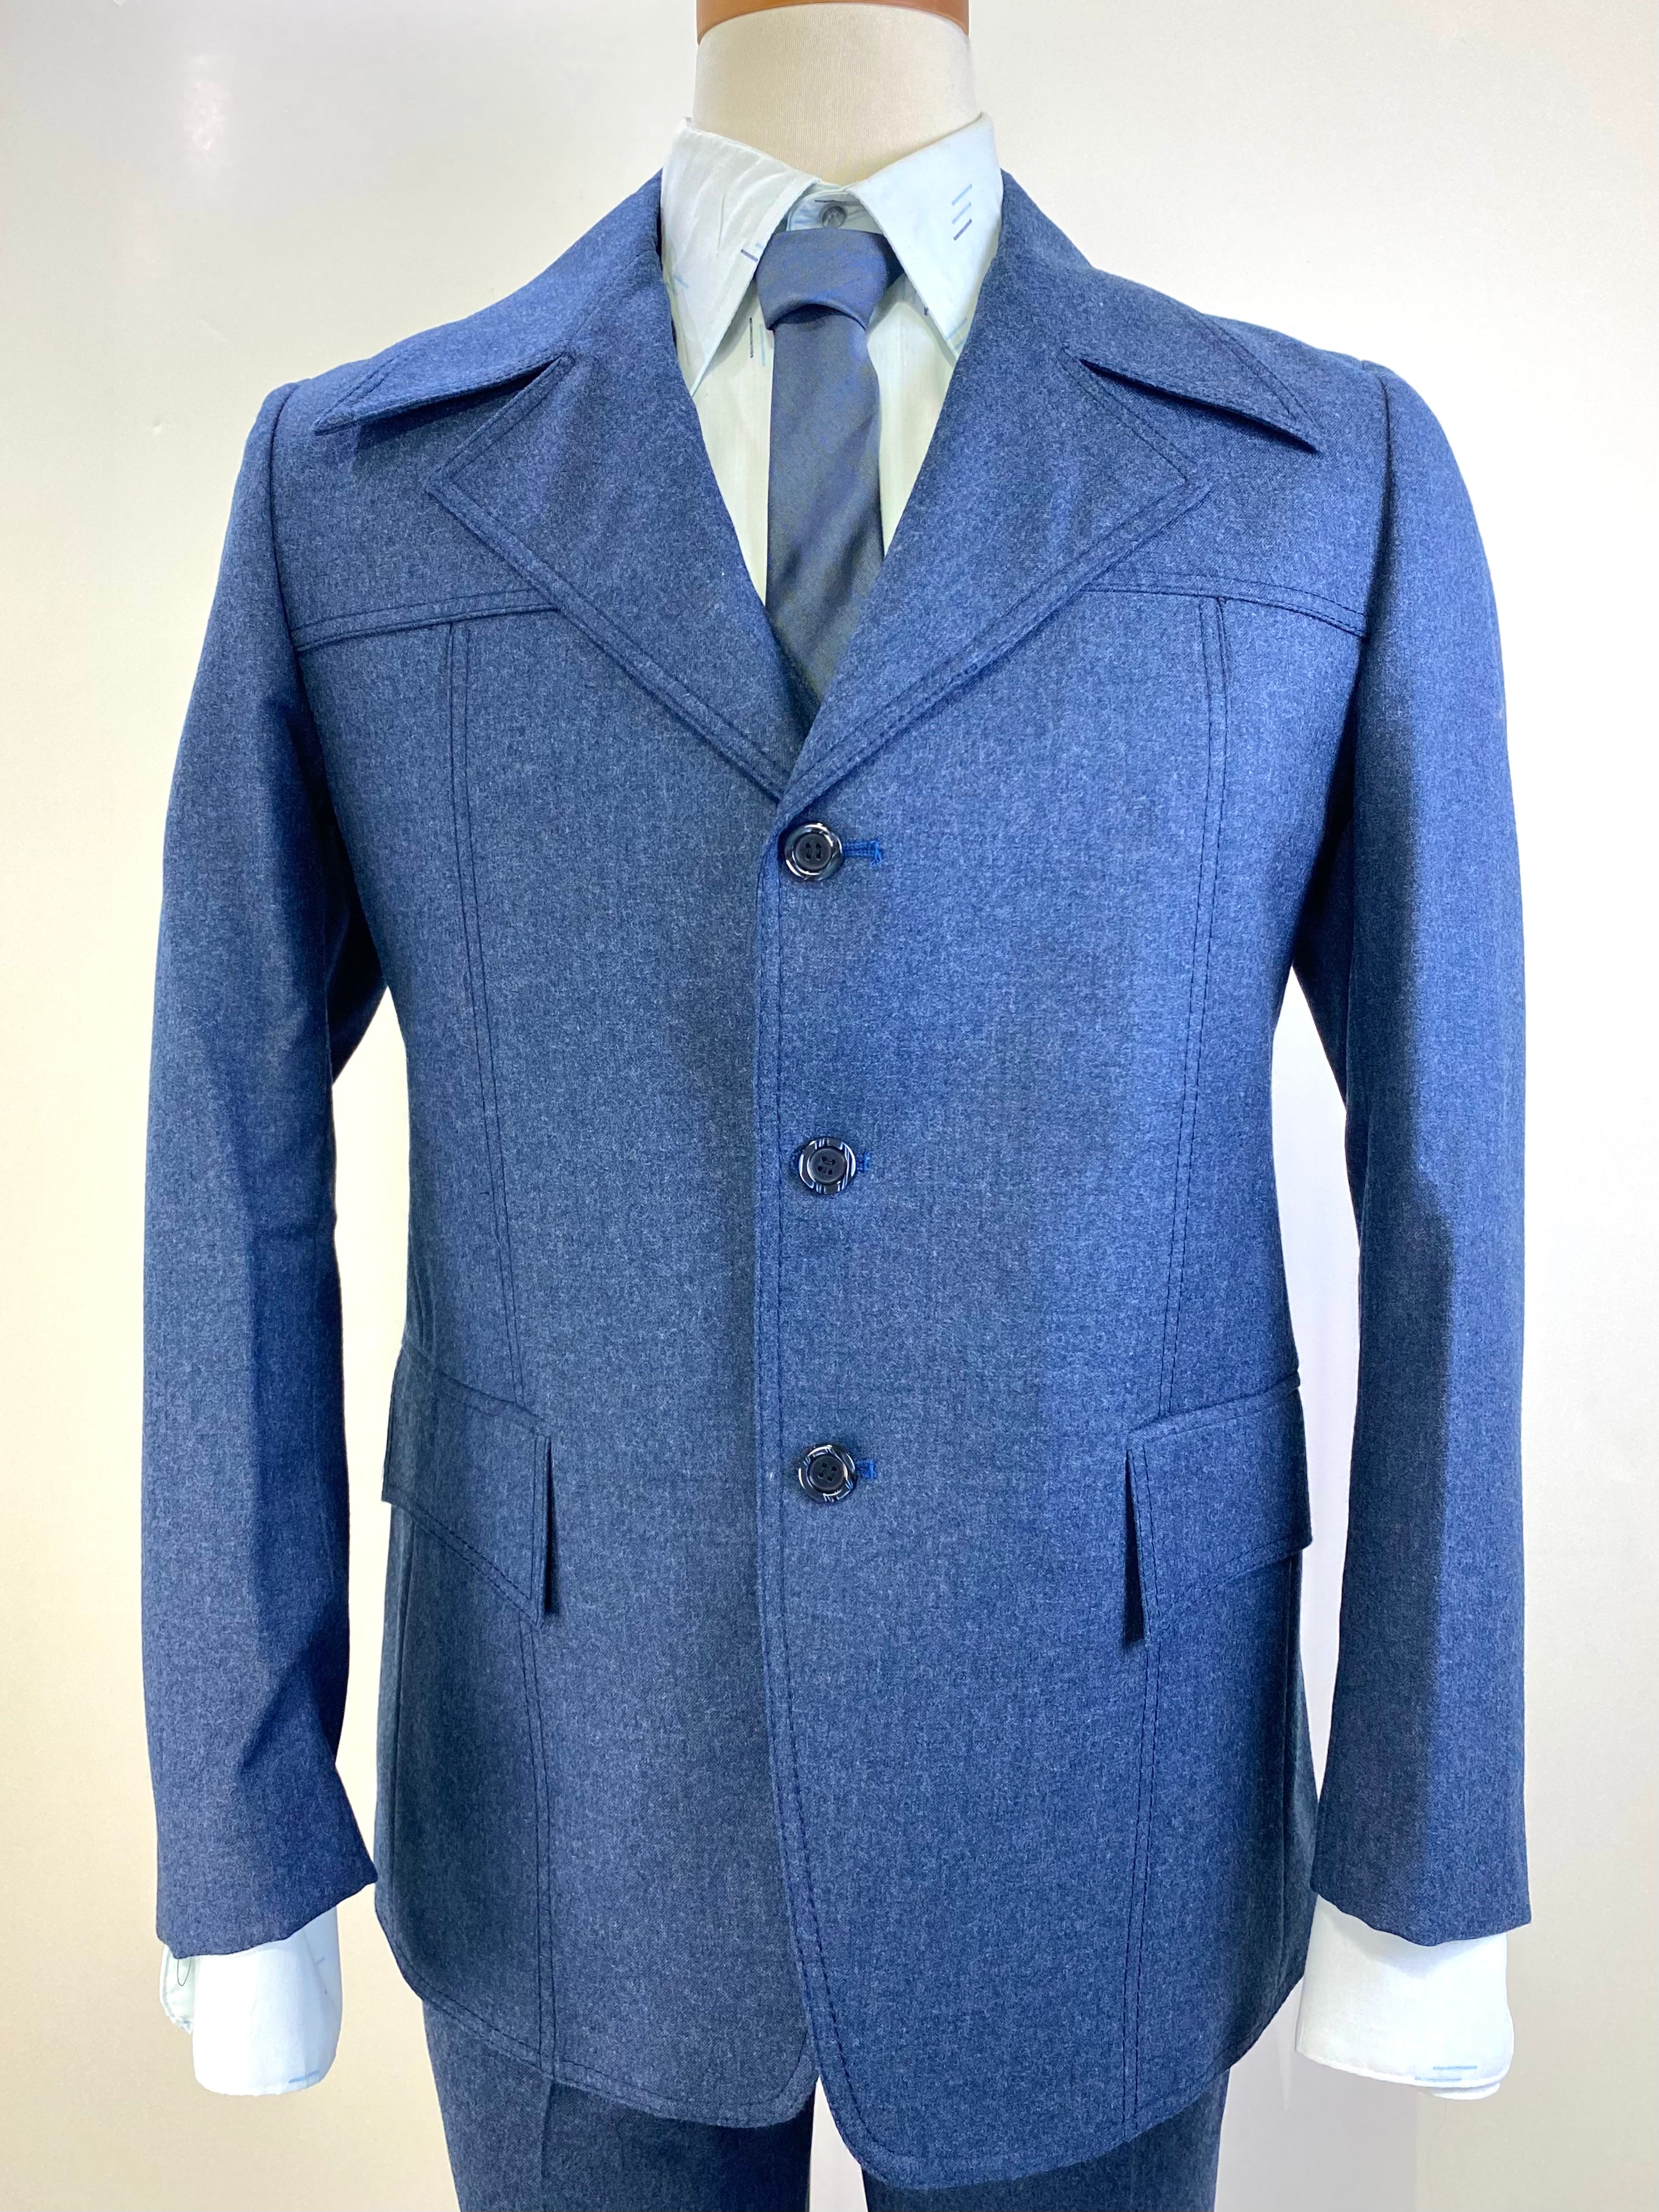 Vintage Men's Suits and Jackets – Ian Drummond Vintage